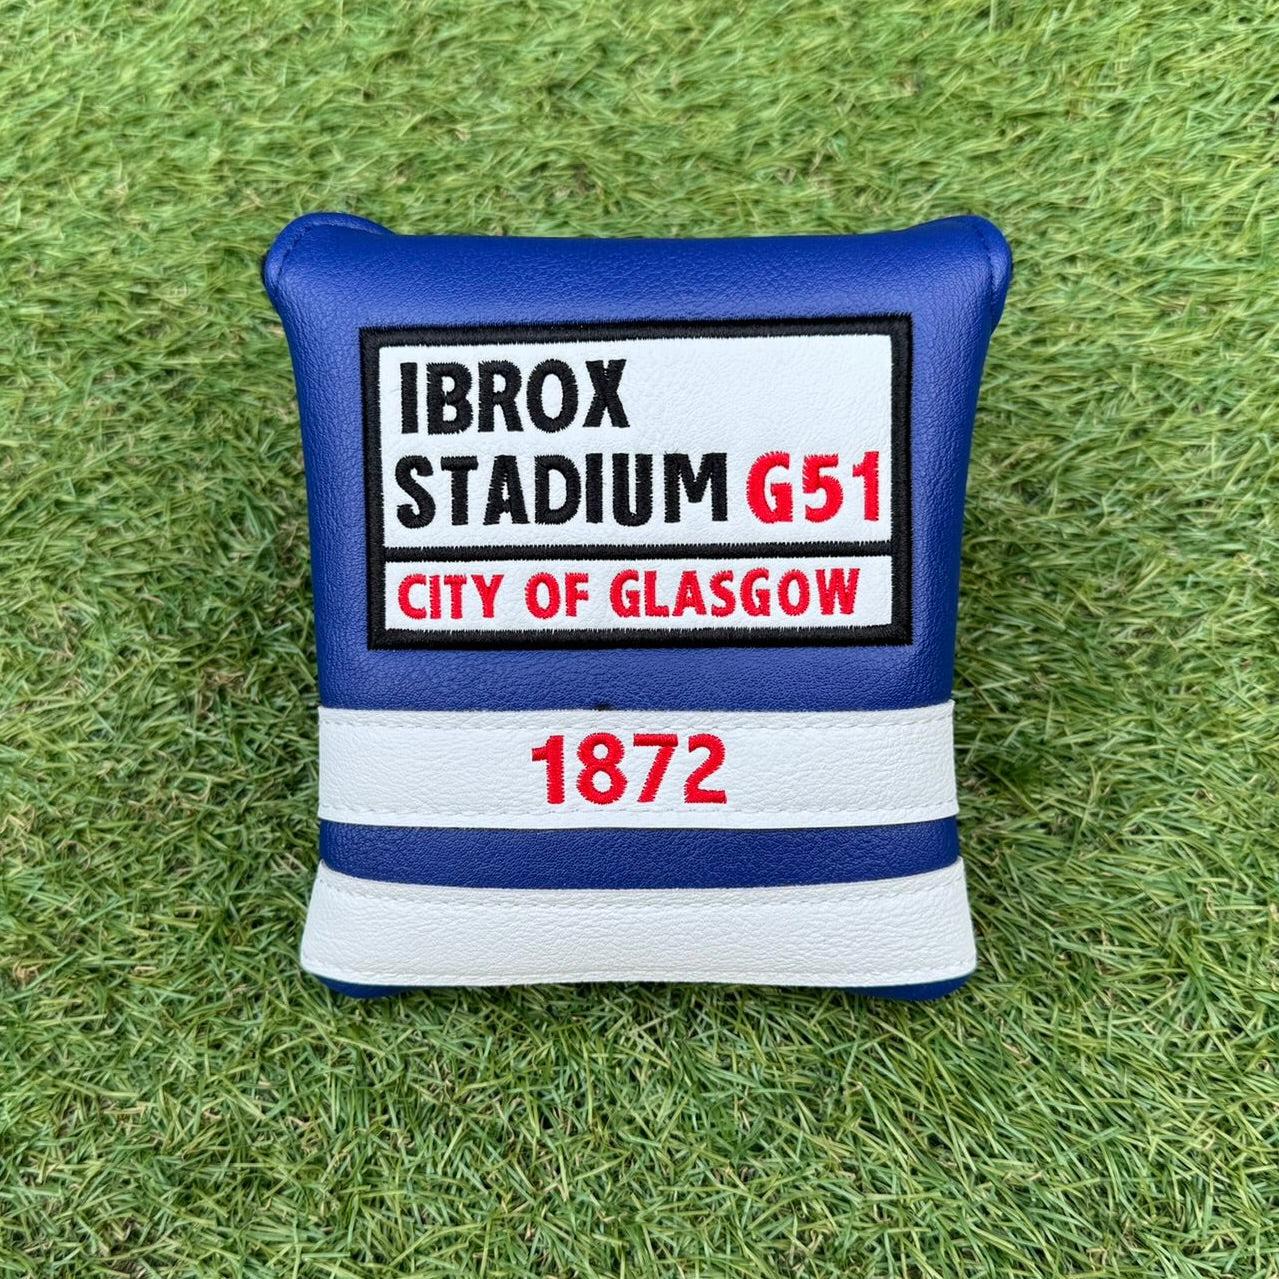 Rangers (Ibrox) Mallet Putter Cover